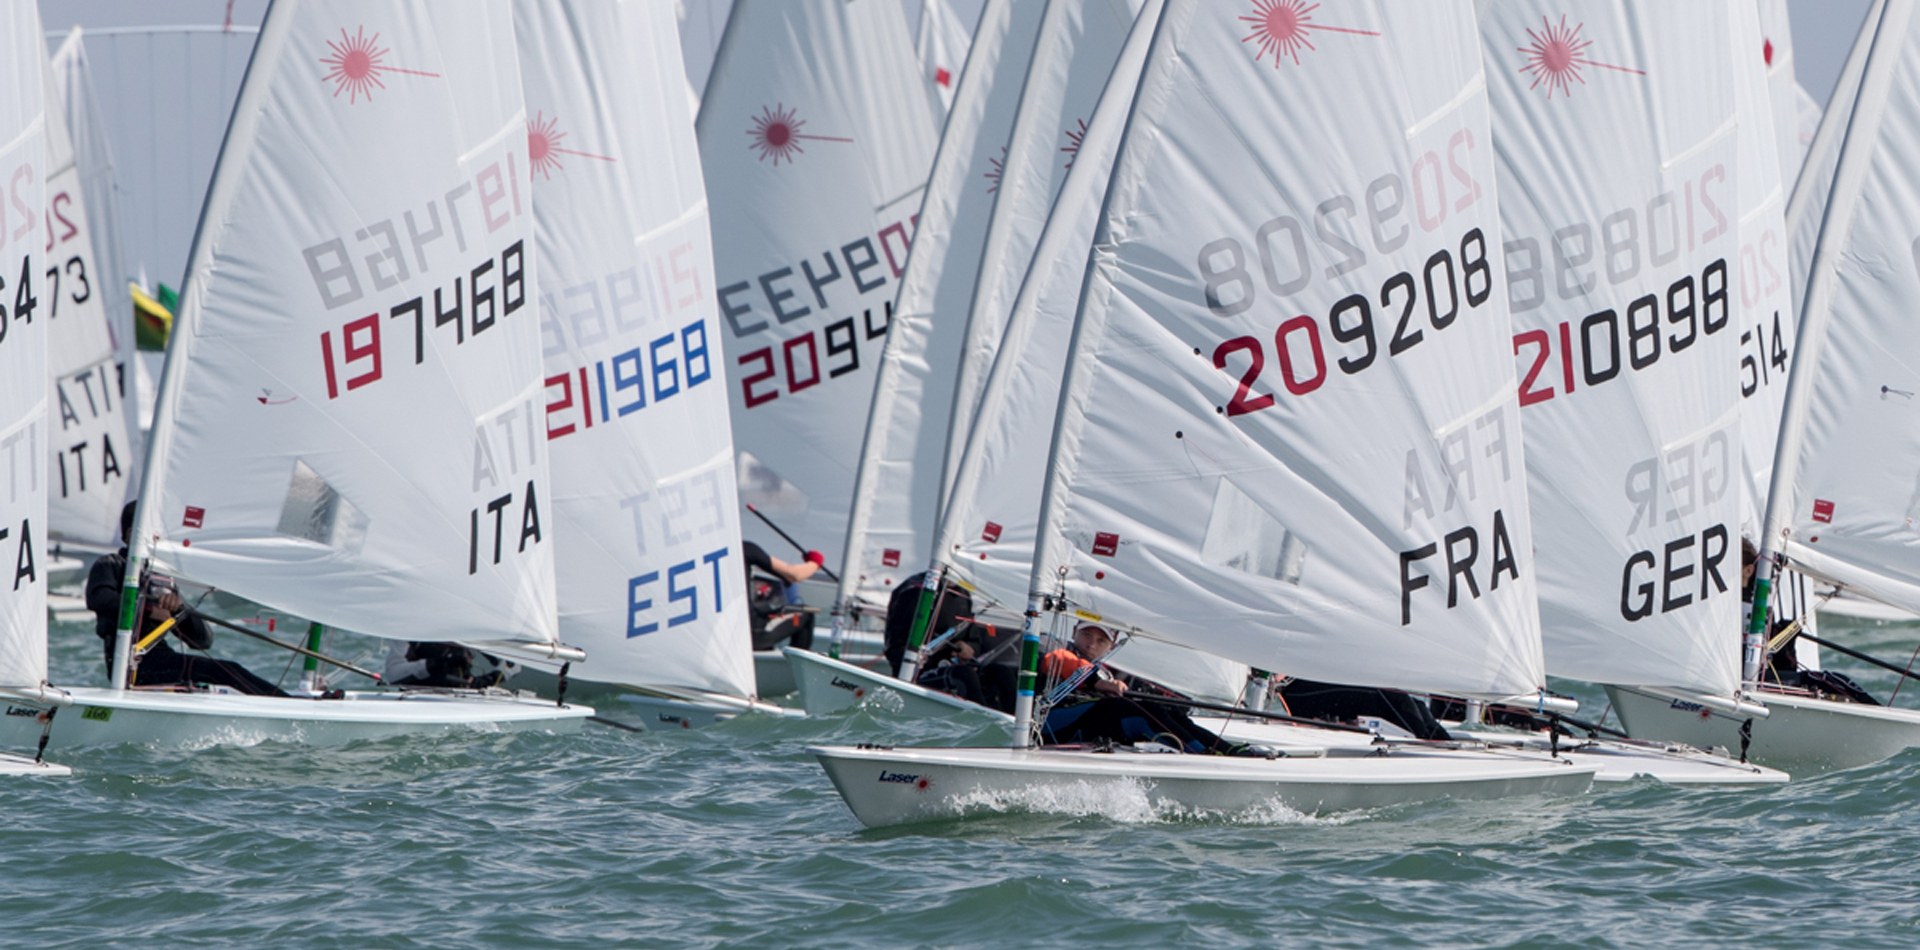 2018 Laser Europa Cup in Ancona - Day 2 - First results - EurILCA